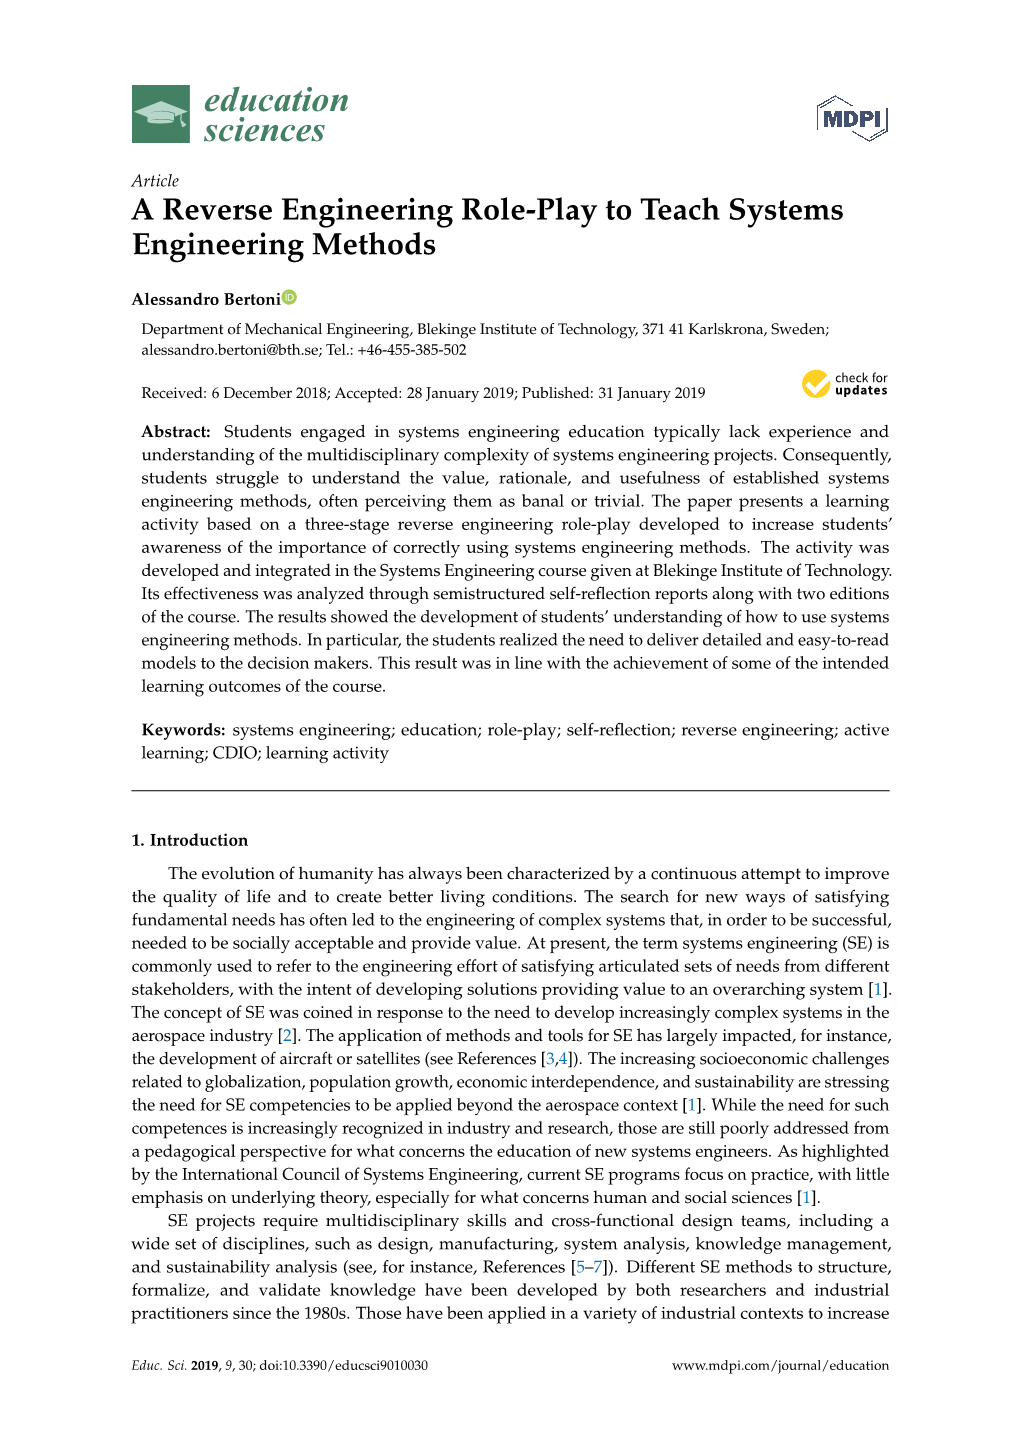 A Reverse Engineering Role-Play to Teach Systems Engineering Methods